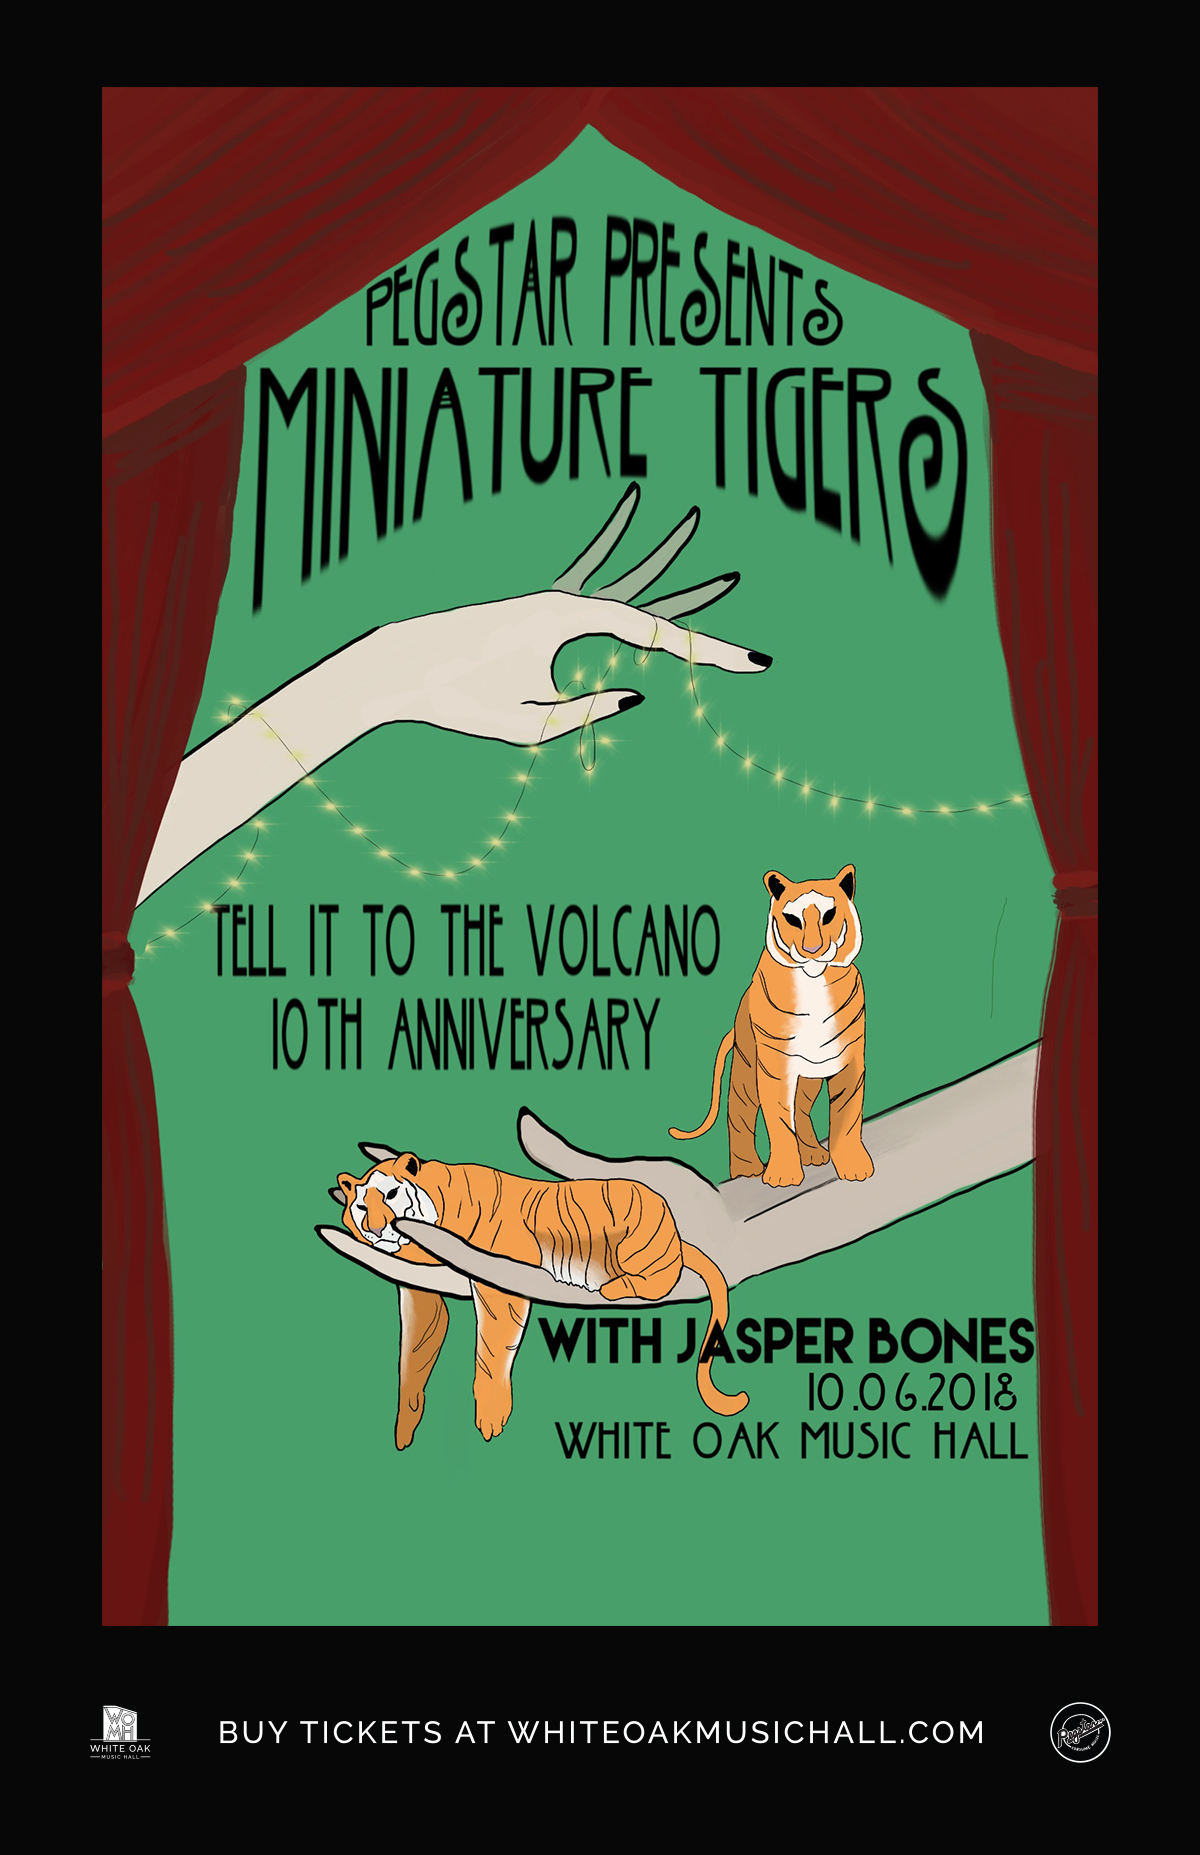 Miniature Tigers Tell It To The Volcano 10th Anniversary Tickets 10/06/18